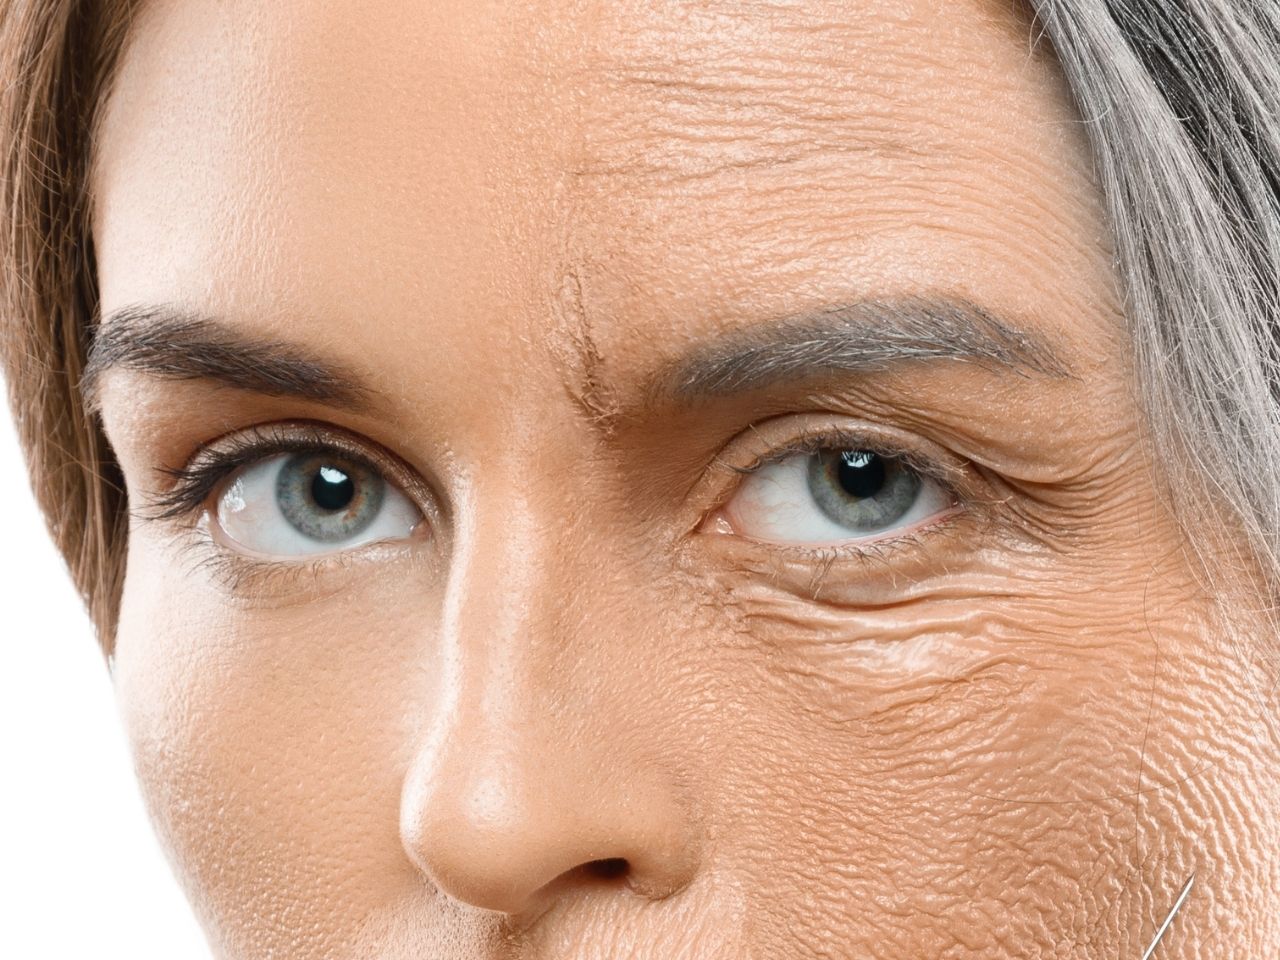 Signs of aging is best captured by our eyes